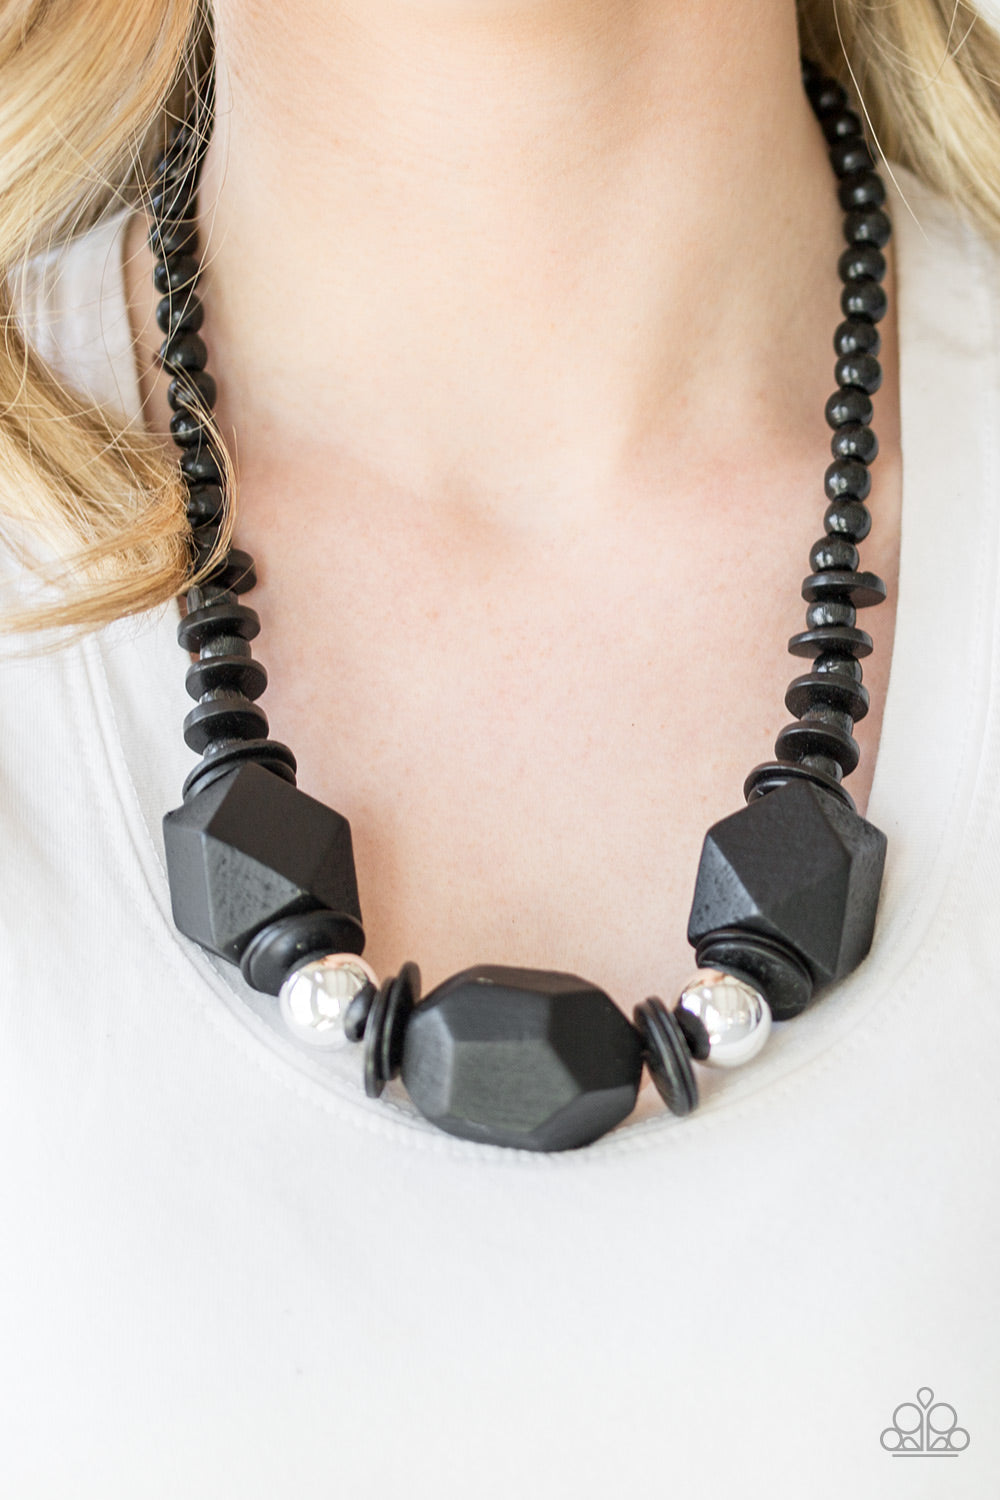 Costa Maya Majesty - Black Wood Necklace - Paparazzi Accessories - Featuring abstract geometric finishes, mismatched black wooden beads are threaded along shiny black cording. Dramatic silver beads are sprinkled between the earthy beading, creating a bold seasonal look below the collar. Features a button loop closure necklace.  Bejeweled Accessories By Kristie - Trendy fashion jewelry for everyone -